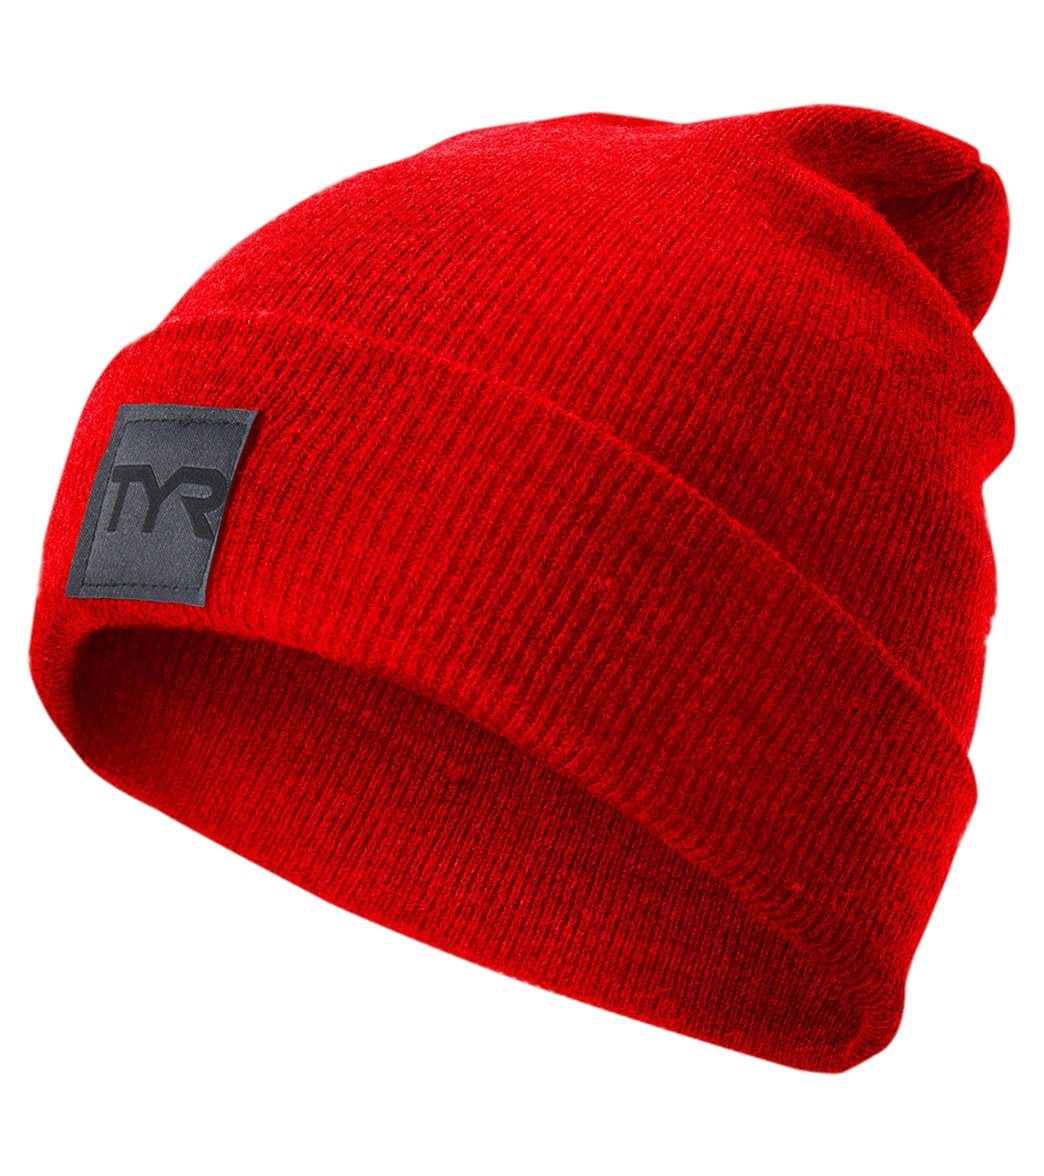 TYR Cuffed Knit Beanie - Red One Size - Swimoutlet.com